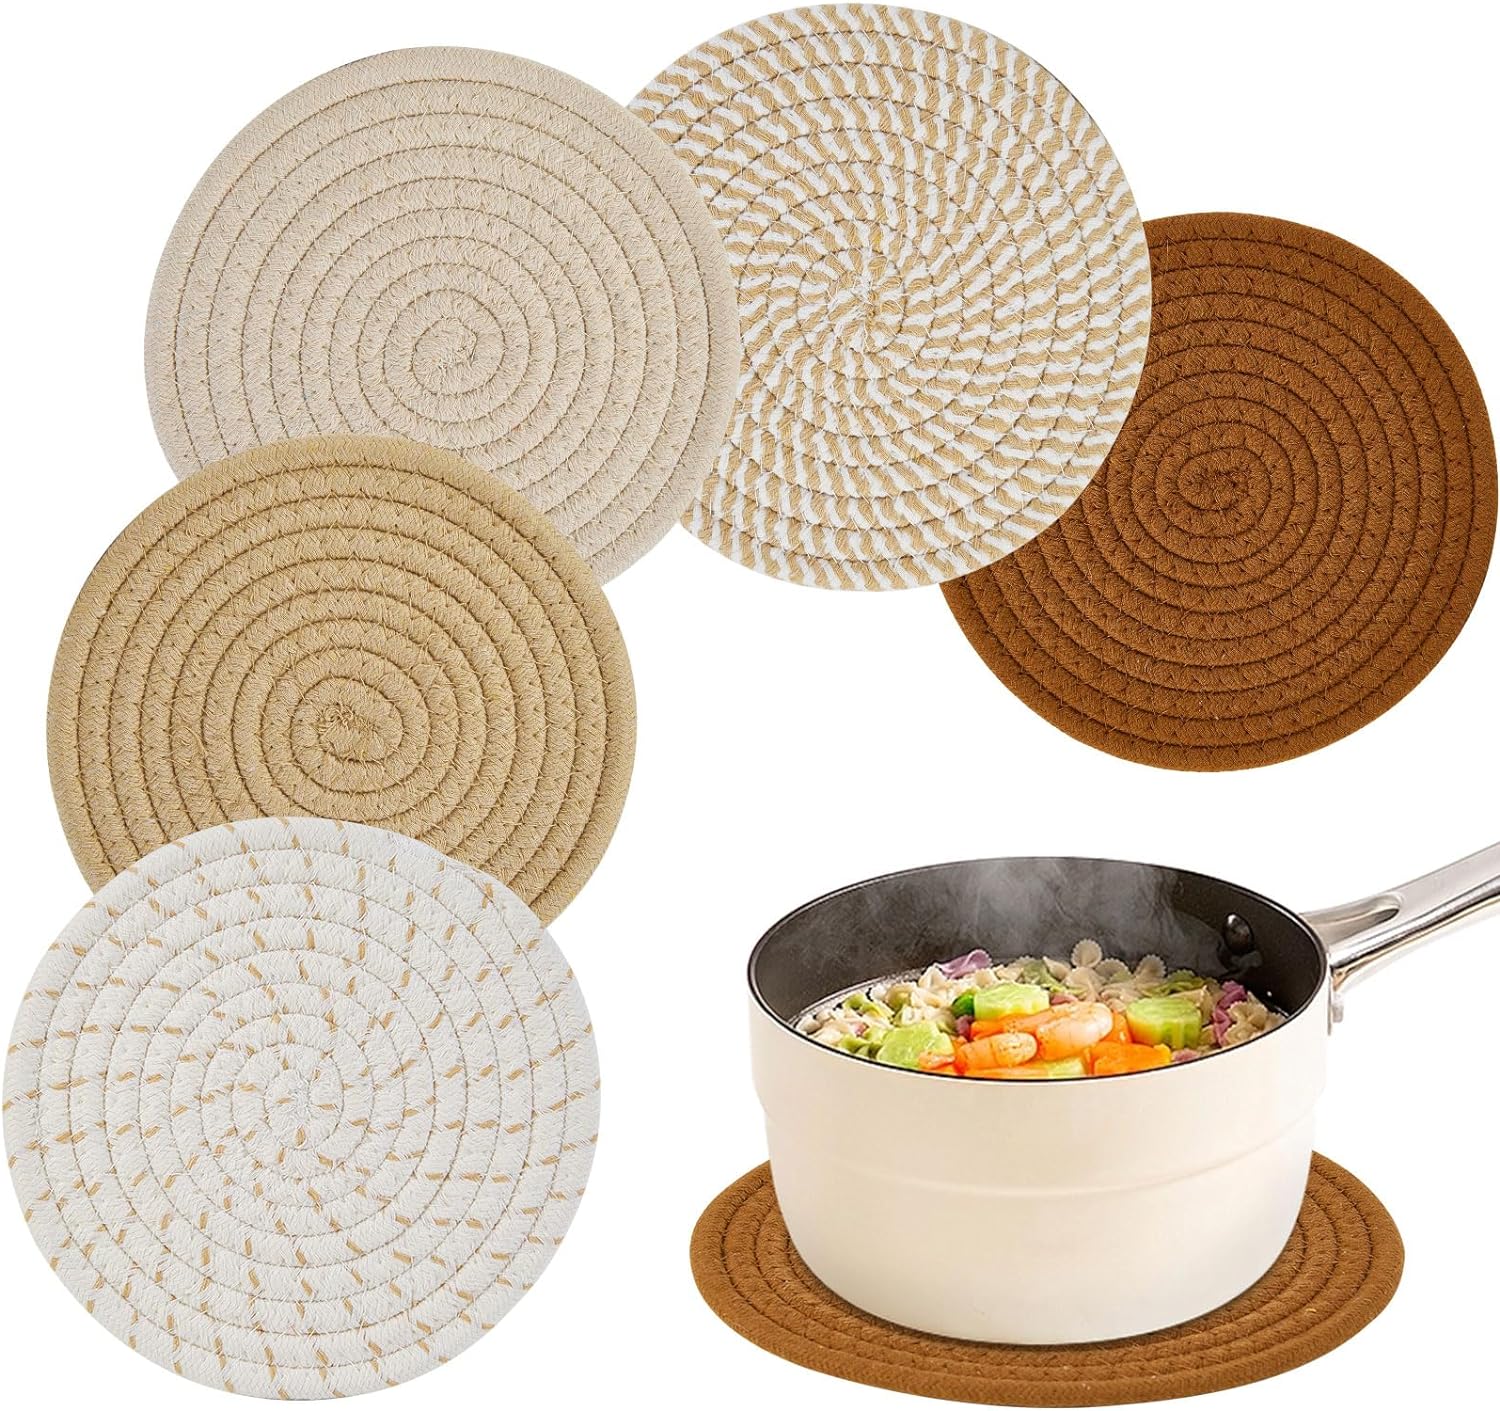 7″ Handmade Trivets for Hot Dishes, Hot pots and Pans, 5 PCS Minimalist Cotton Hot Plate Mats, Woven Heat-Resistant Pot Holders Pads Set for Kitchen Counter Table Home Essentials for Housewarming